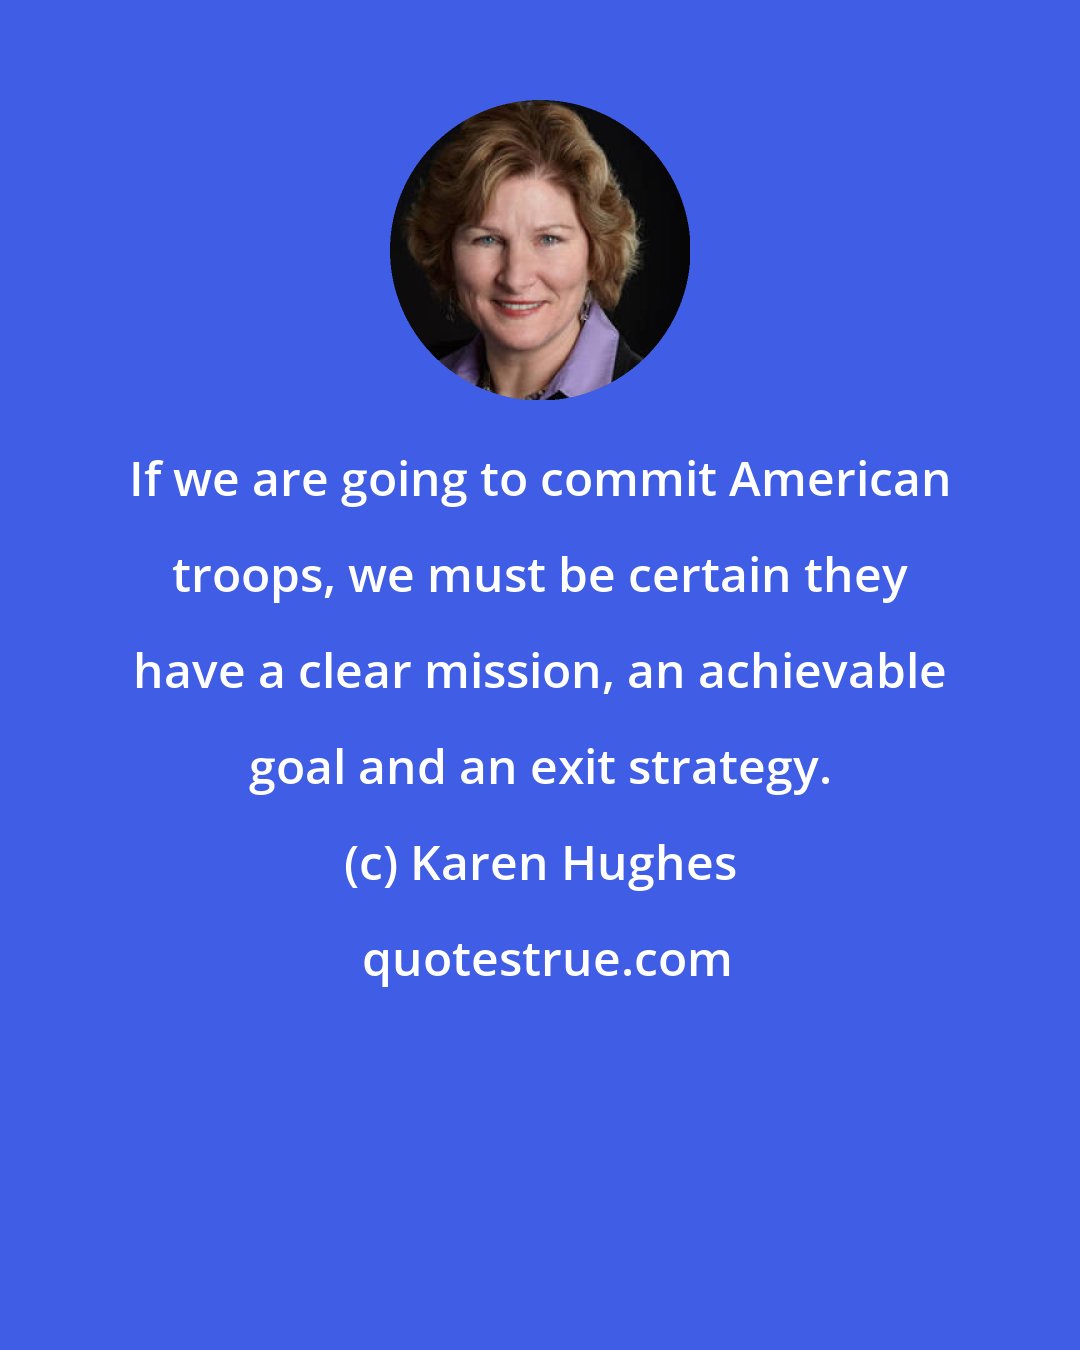 Karen Hughes: If we are going to commit American troops, we must be certain they have a clear mission, an achievable goal and an exit strategy.